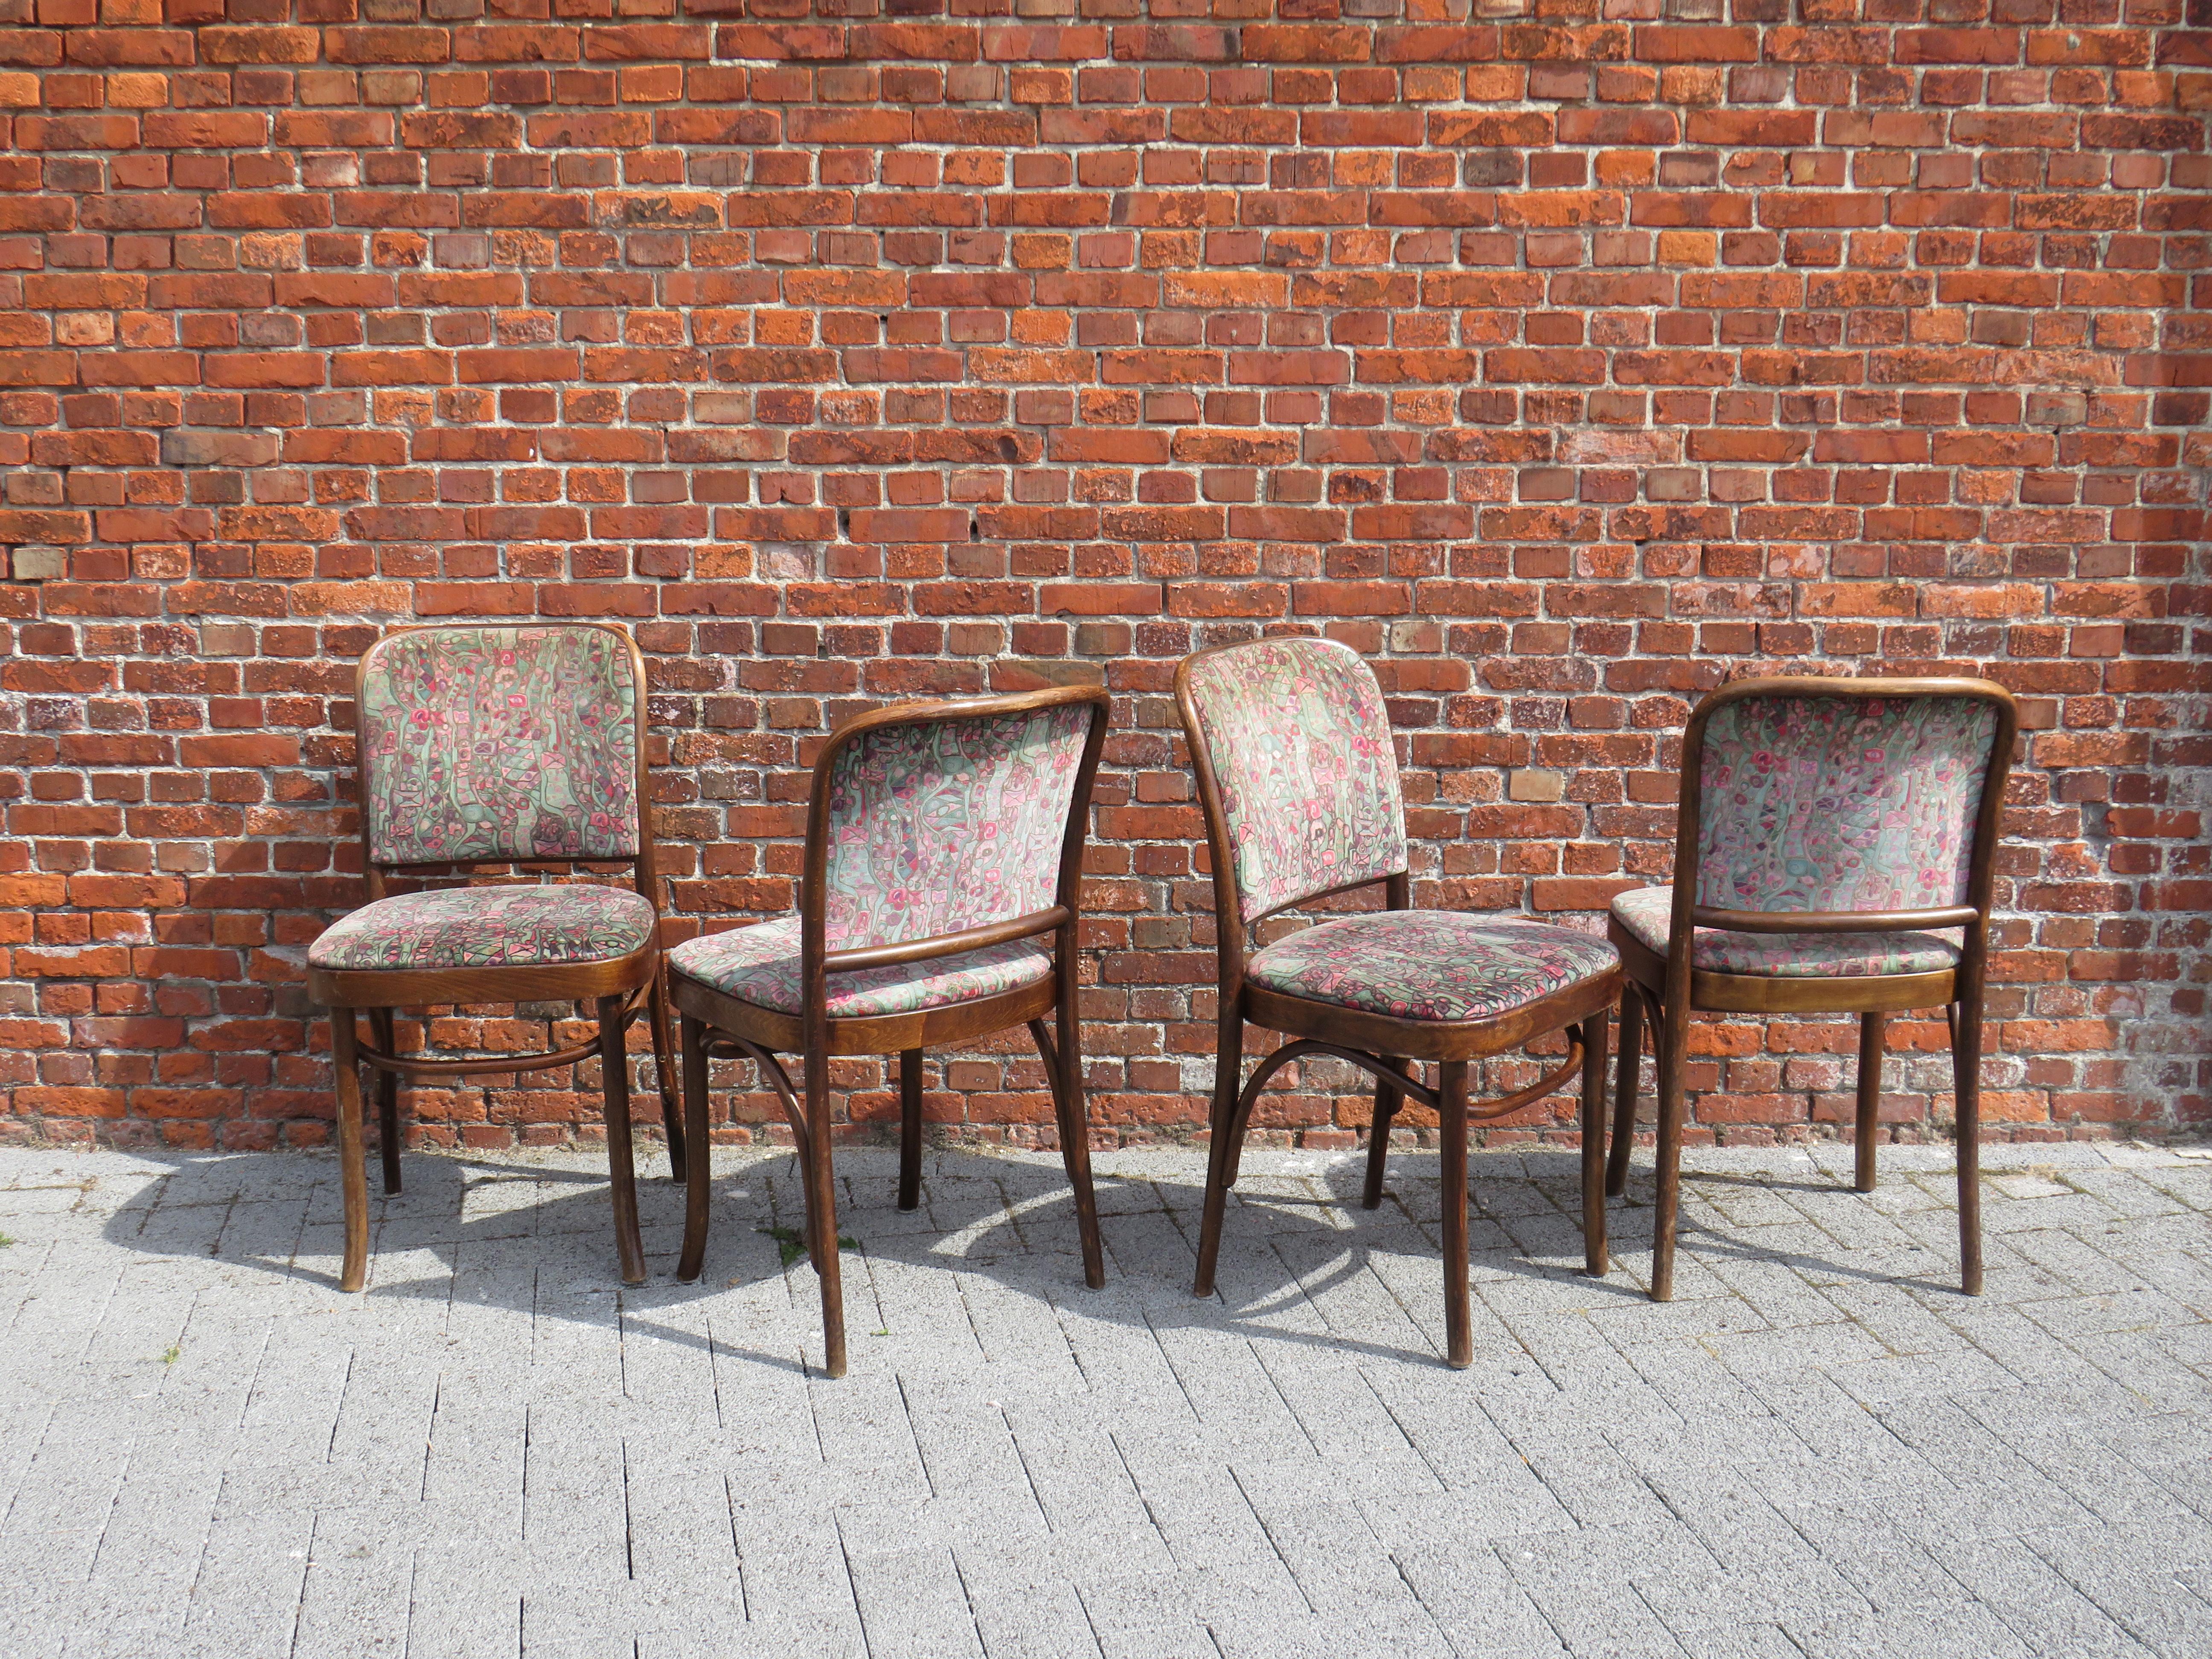 4 Thonet Chairs, Model Prague No. 811, First Half of the 20th Century For Sale 1